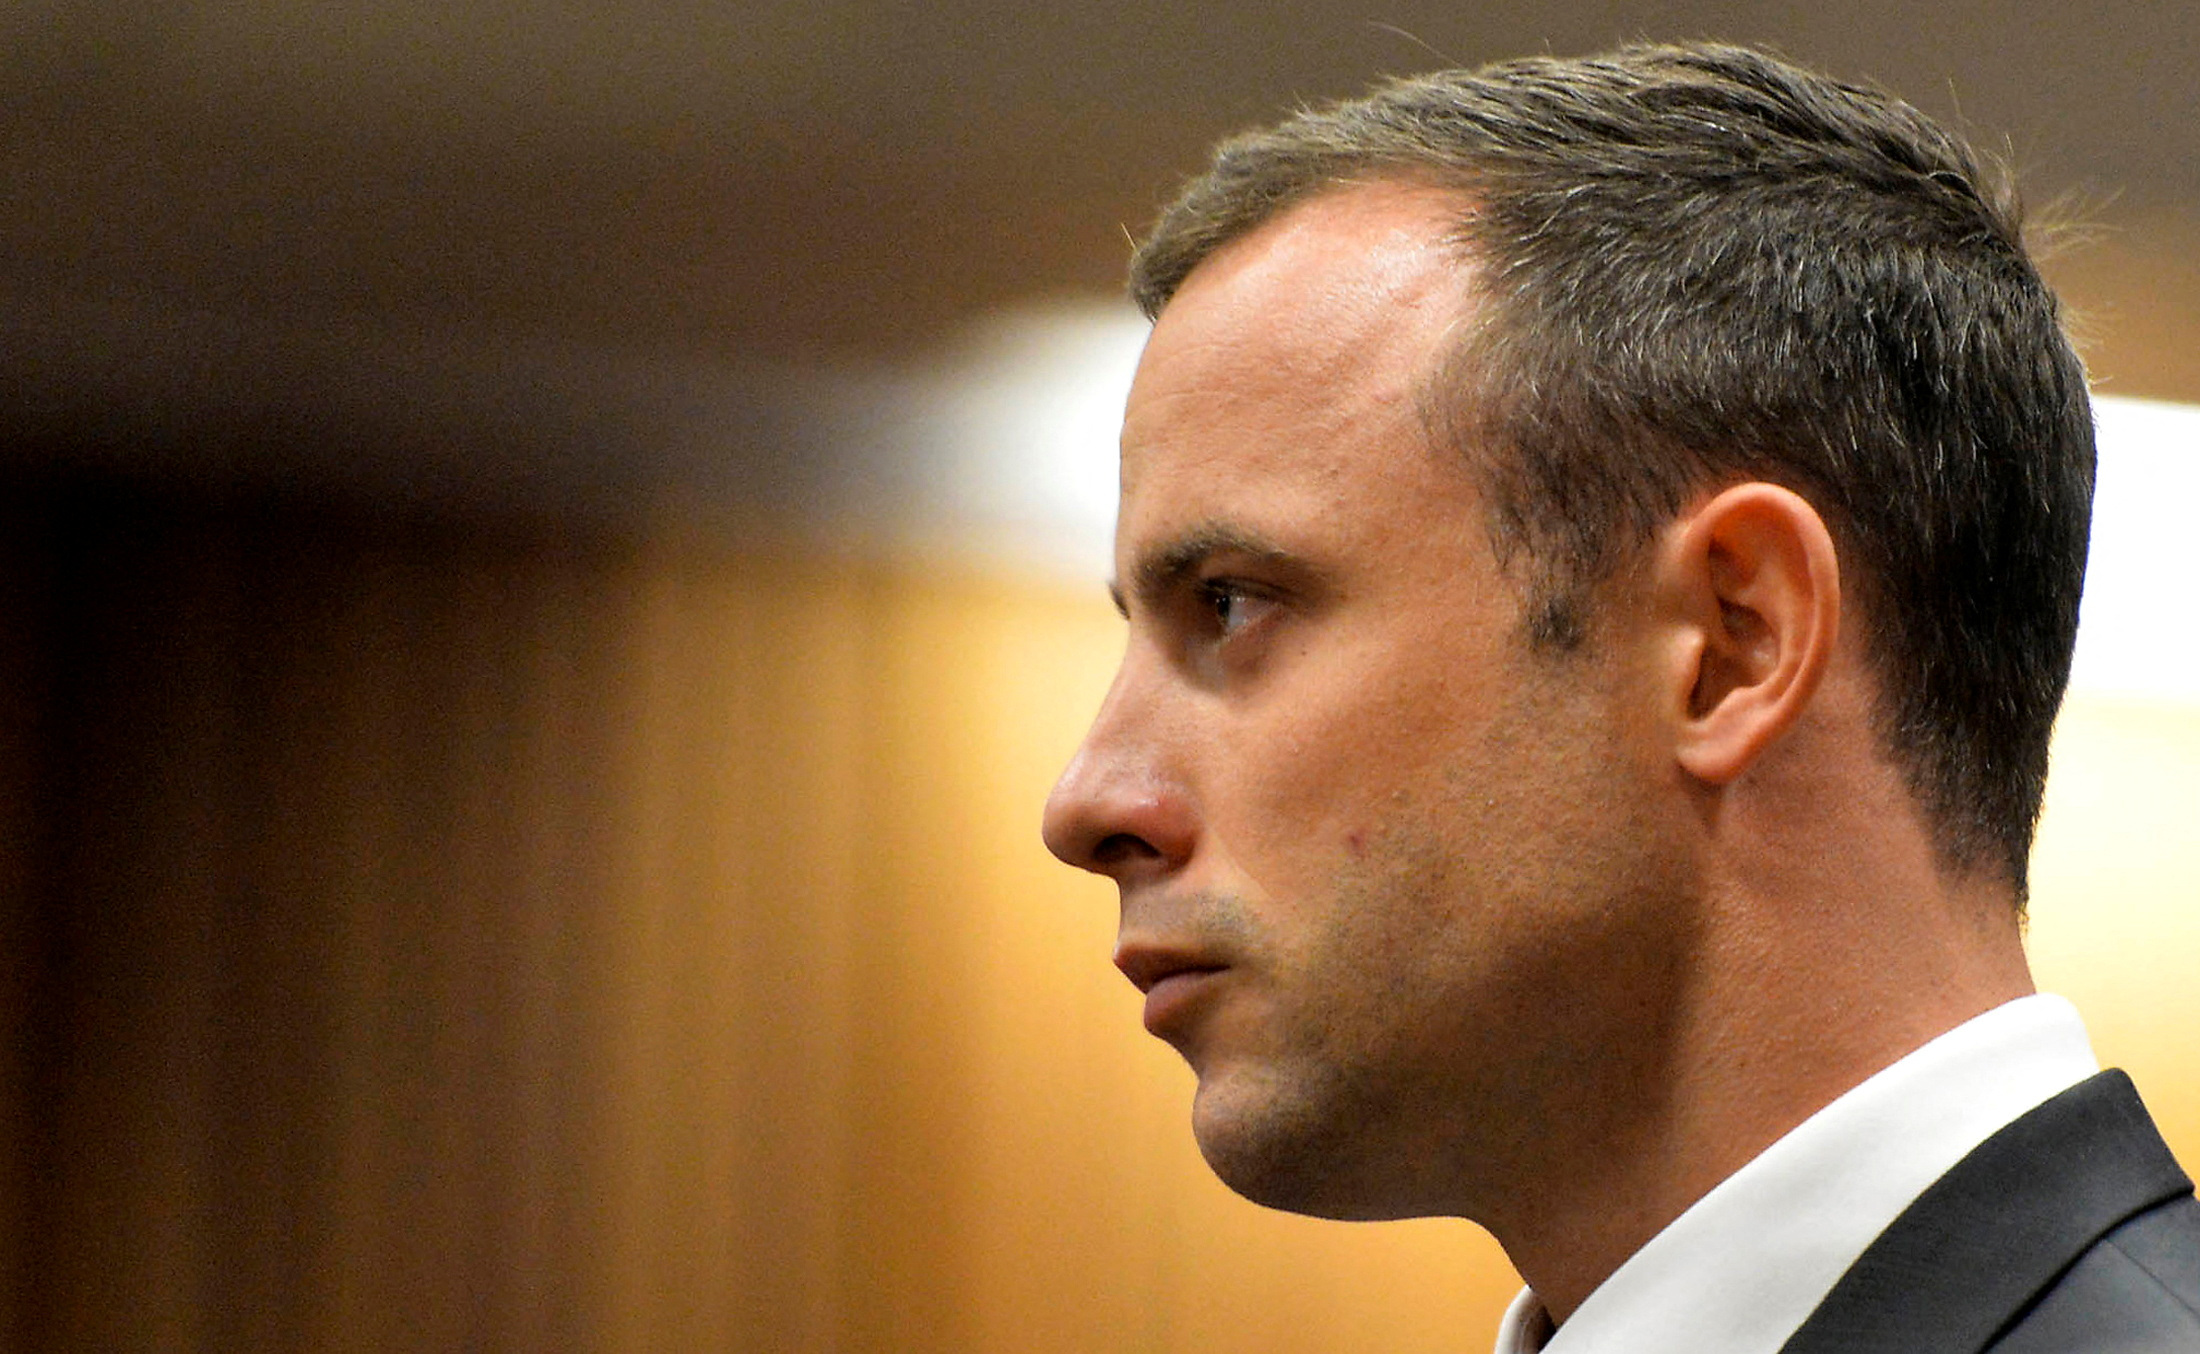 FILE PHOTO: Olympic and Paralympic track star Oscar Pistorius stands in the dock during his trial at the North Gauteng High Court in Pretoria March 3, 2014. REUTERS/Herman Verwey/Pool/File Photo